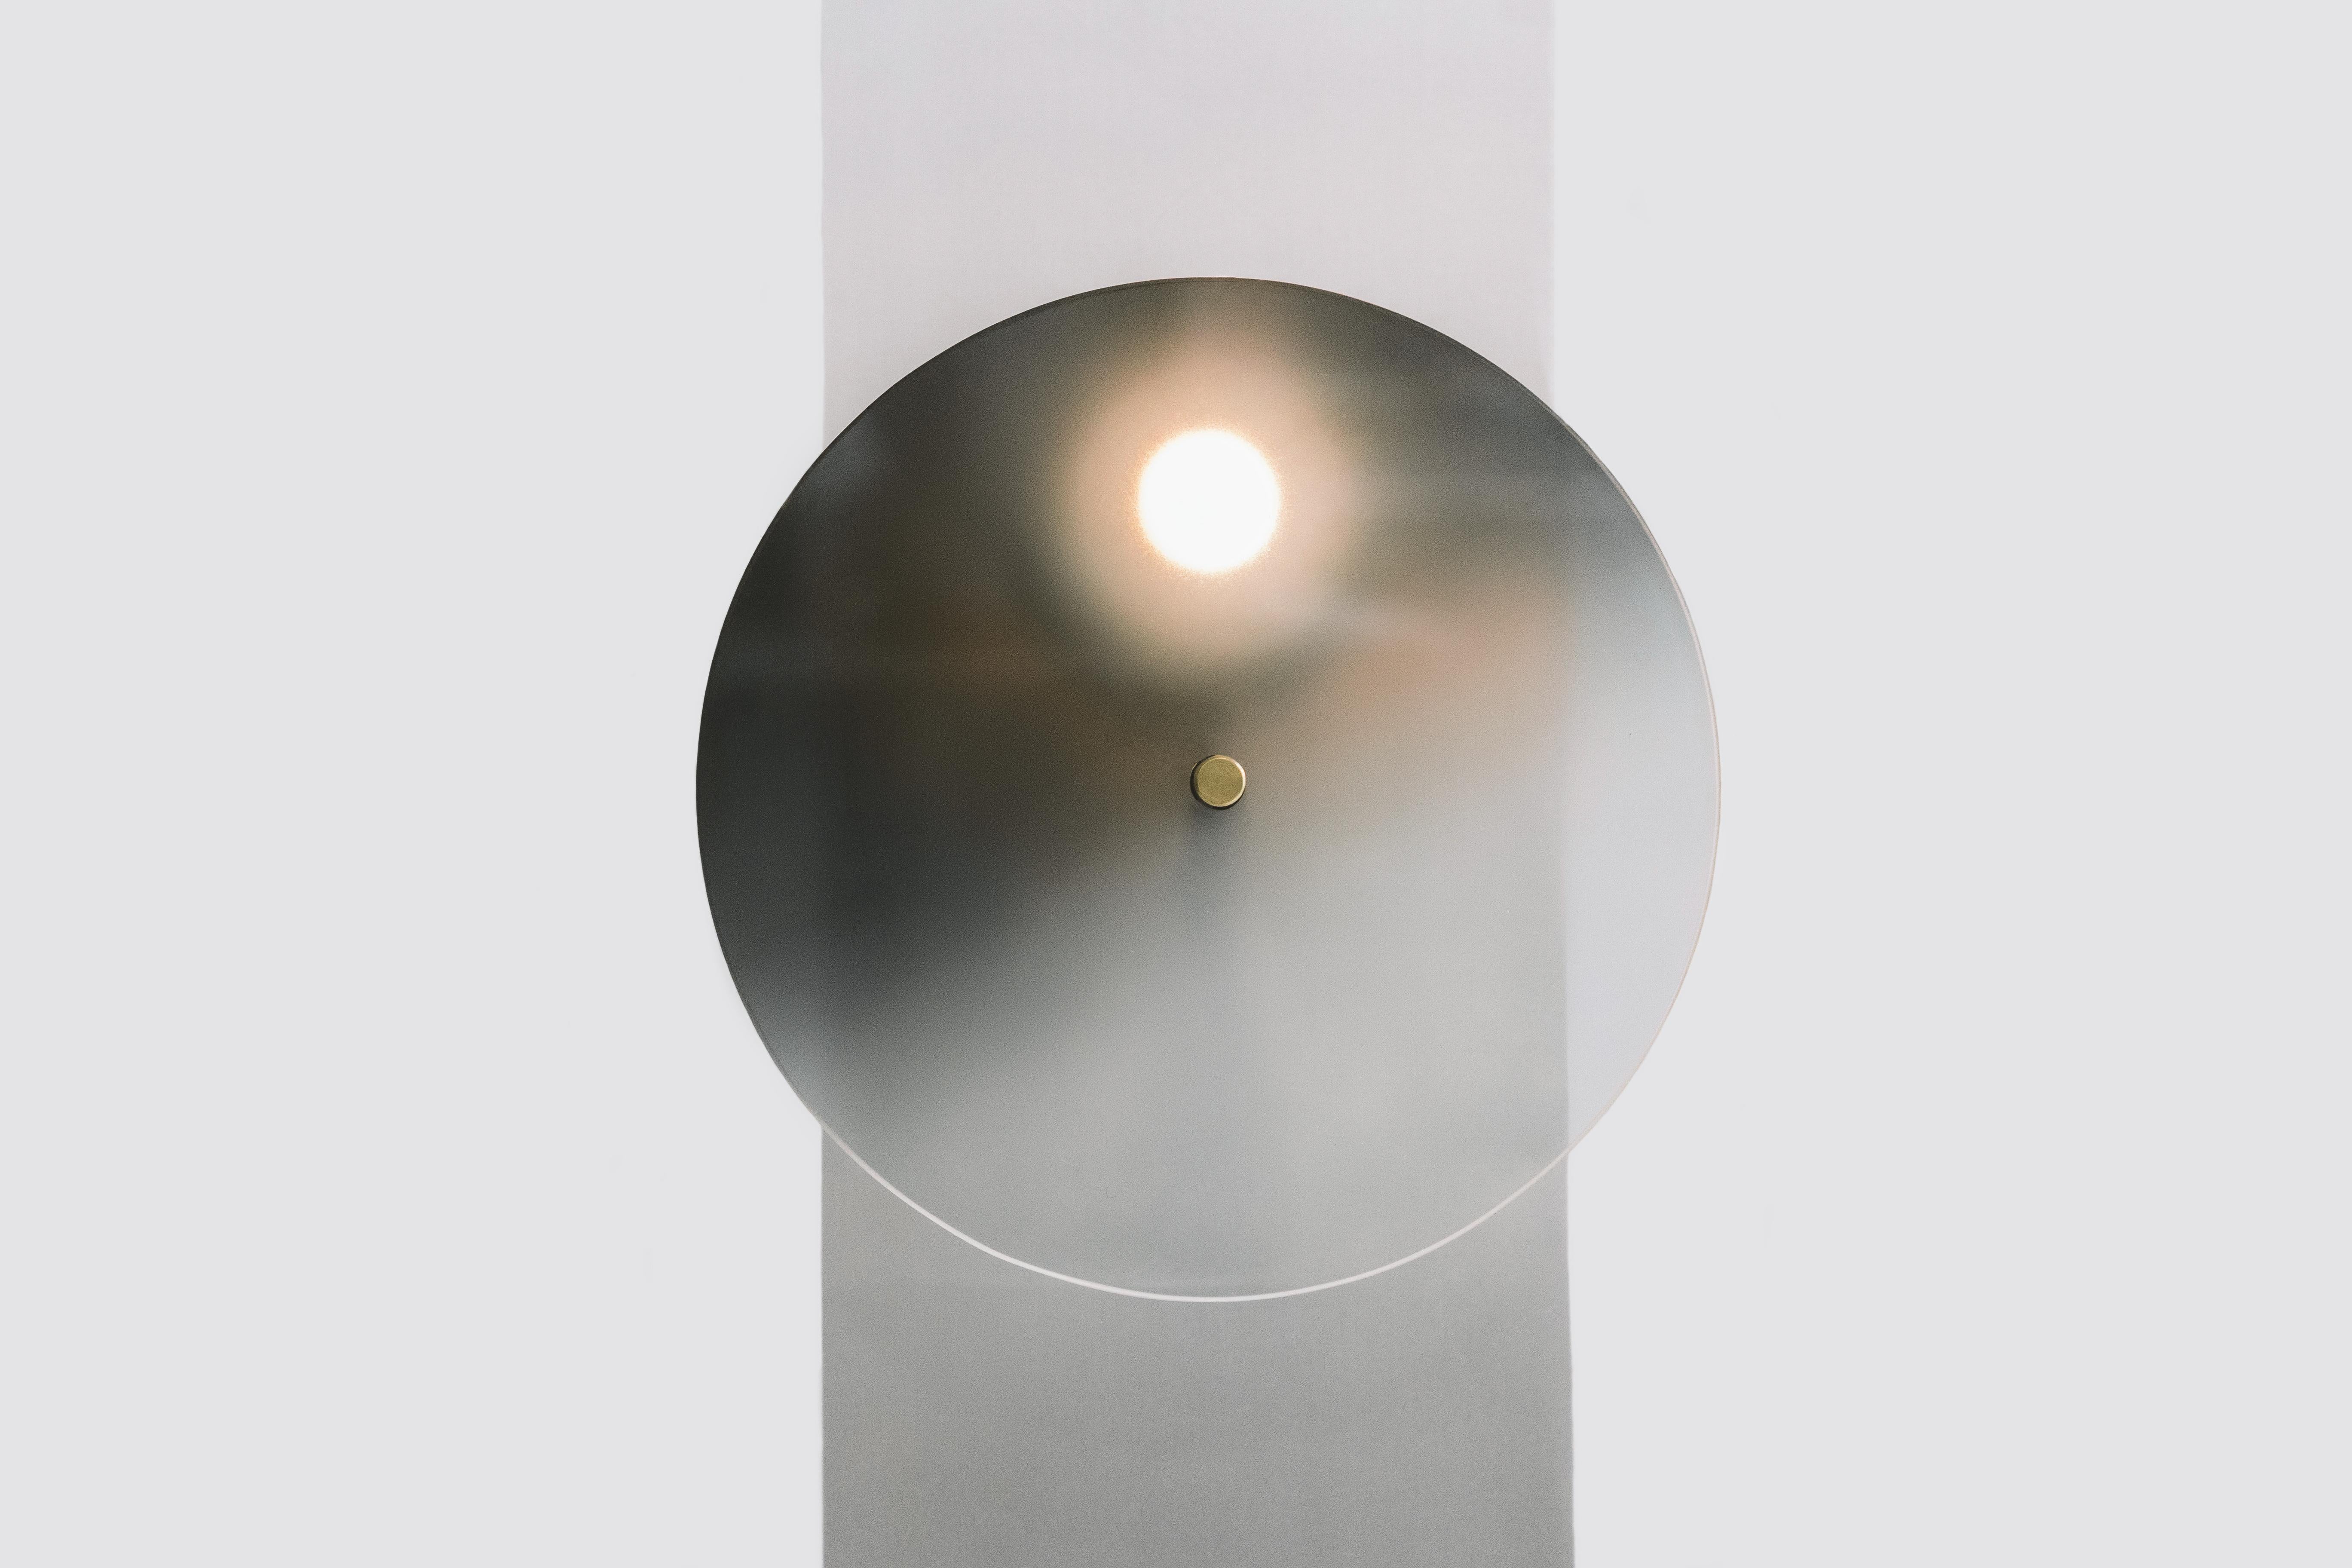 Inherent in its design, the Tinge series draws the user to the source of light. The brass knob controls the position of the tinted glass disc, which, when spun, manually changes the brightness of light. The analog lighting experience of the Tinge